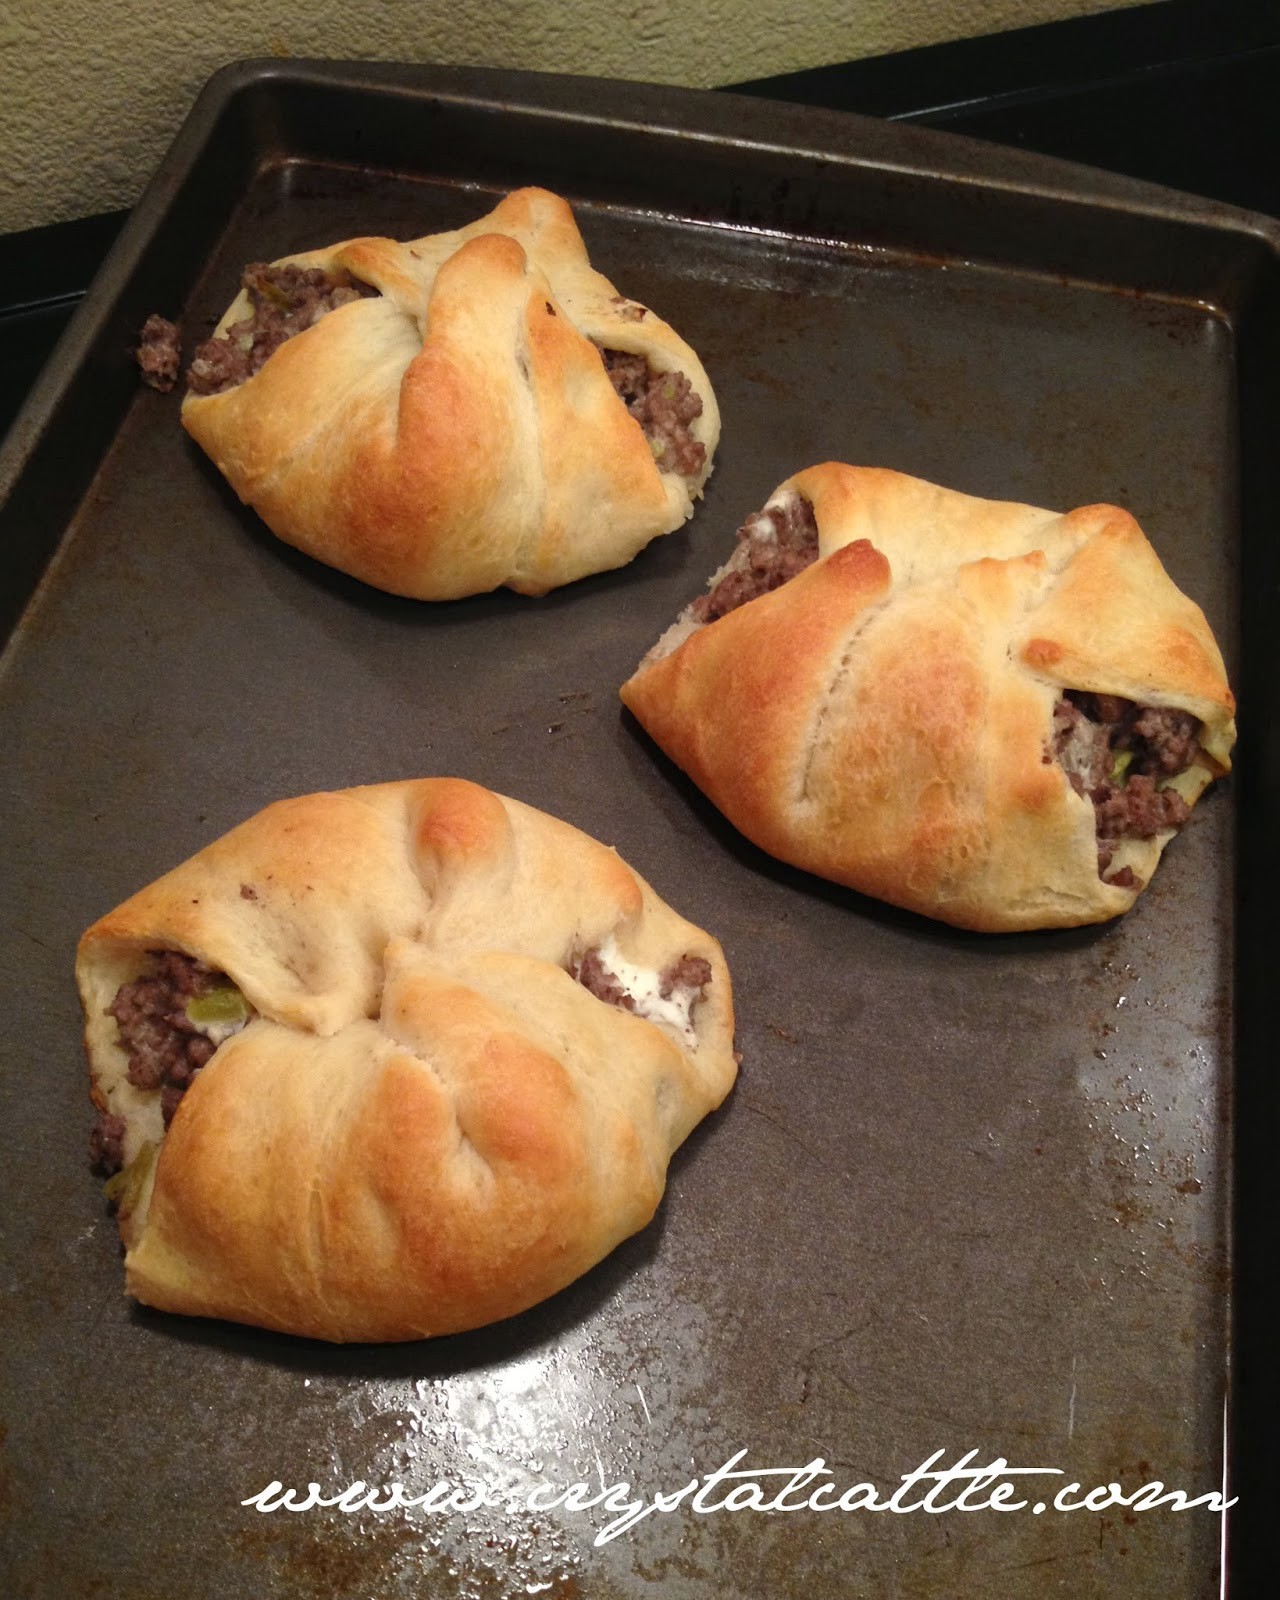 Crescent Roll Recipes With Ground Beef
 Crystal Cattle Green Chile Hamburger Crescent Roll Recipe